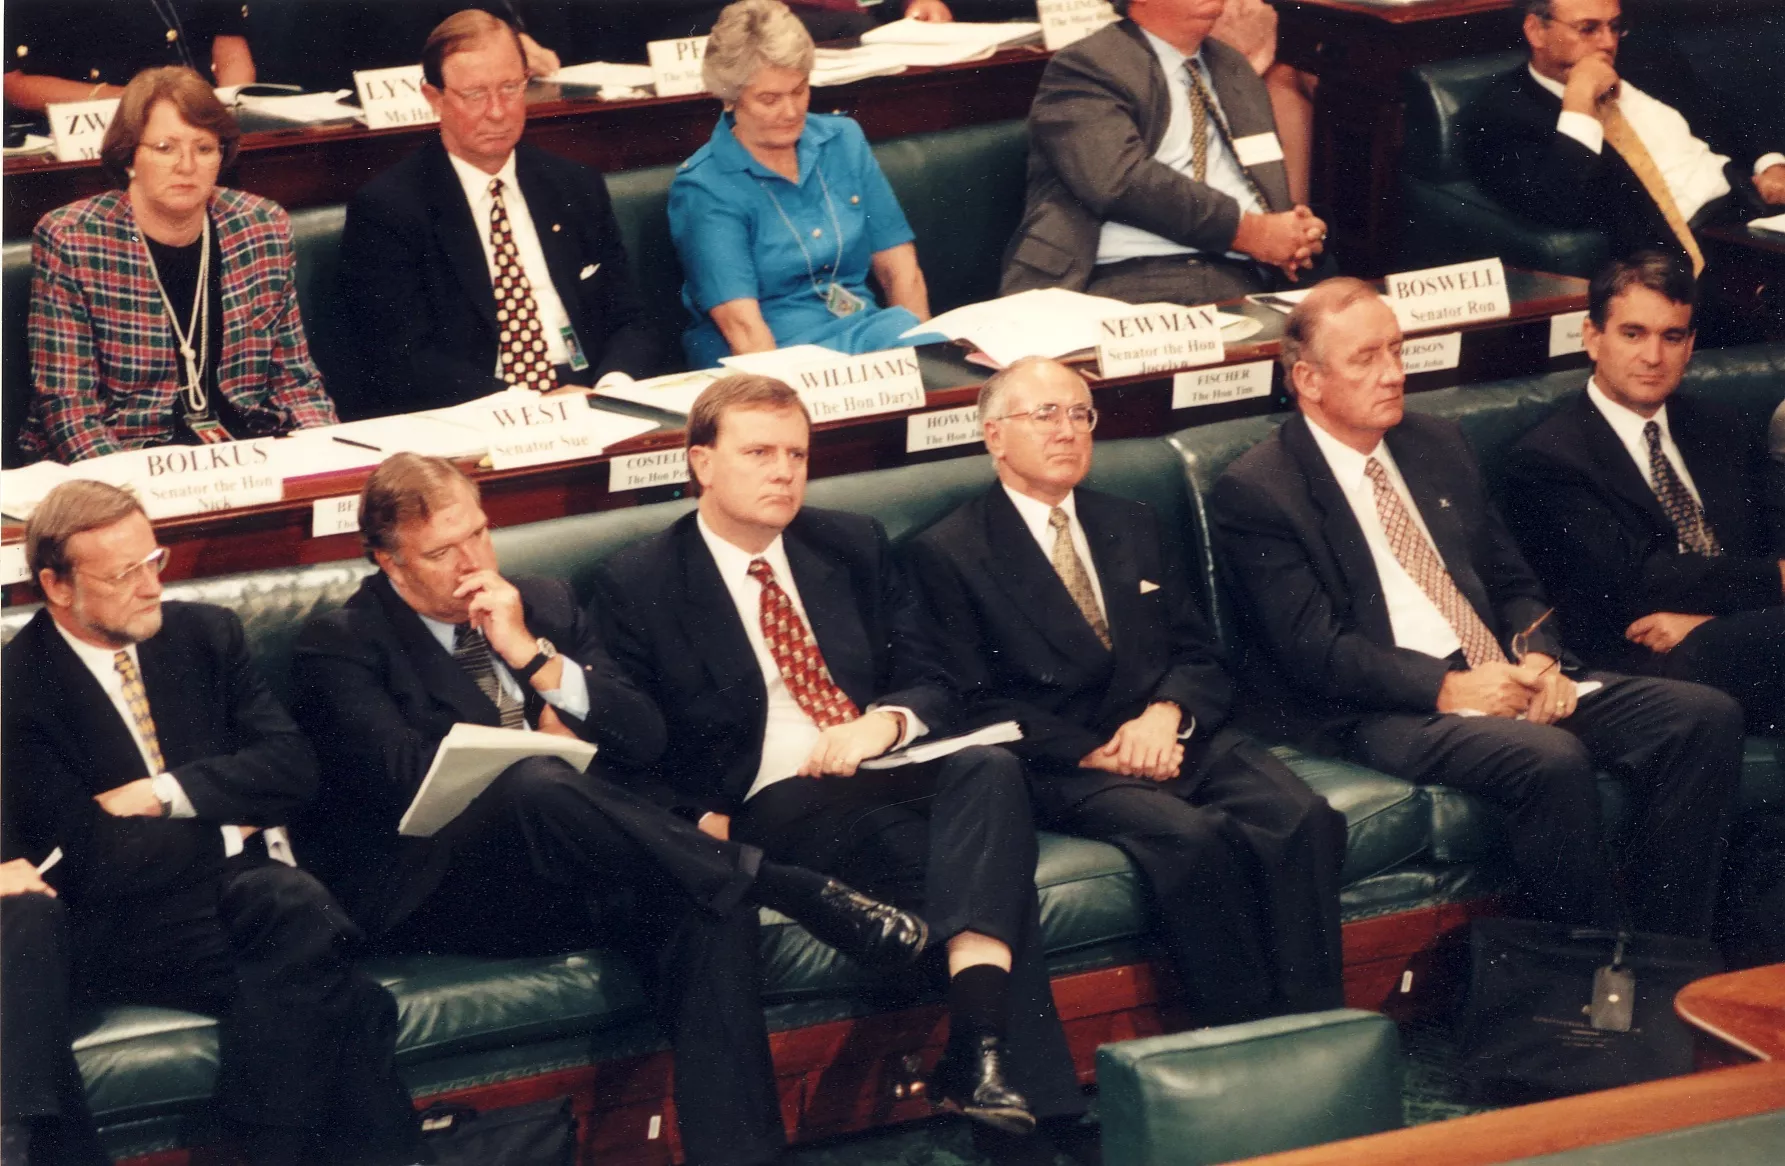 The Constitutional Convention, held at Old Parliament House in 1998, included many politicians from across party lines, with both republicans and monarchists in the government. Monarchist prime minister John Howard shared the front benches of the old House of Representatives chamber with his republican treasurer Peter Costello and his Labor republican opponent, Opposition Leader Kim Beazley. 